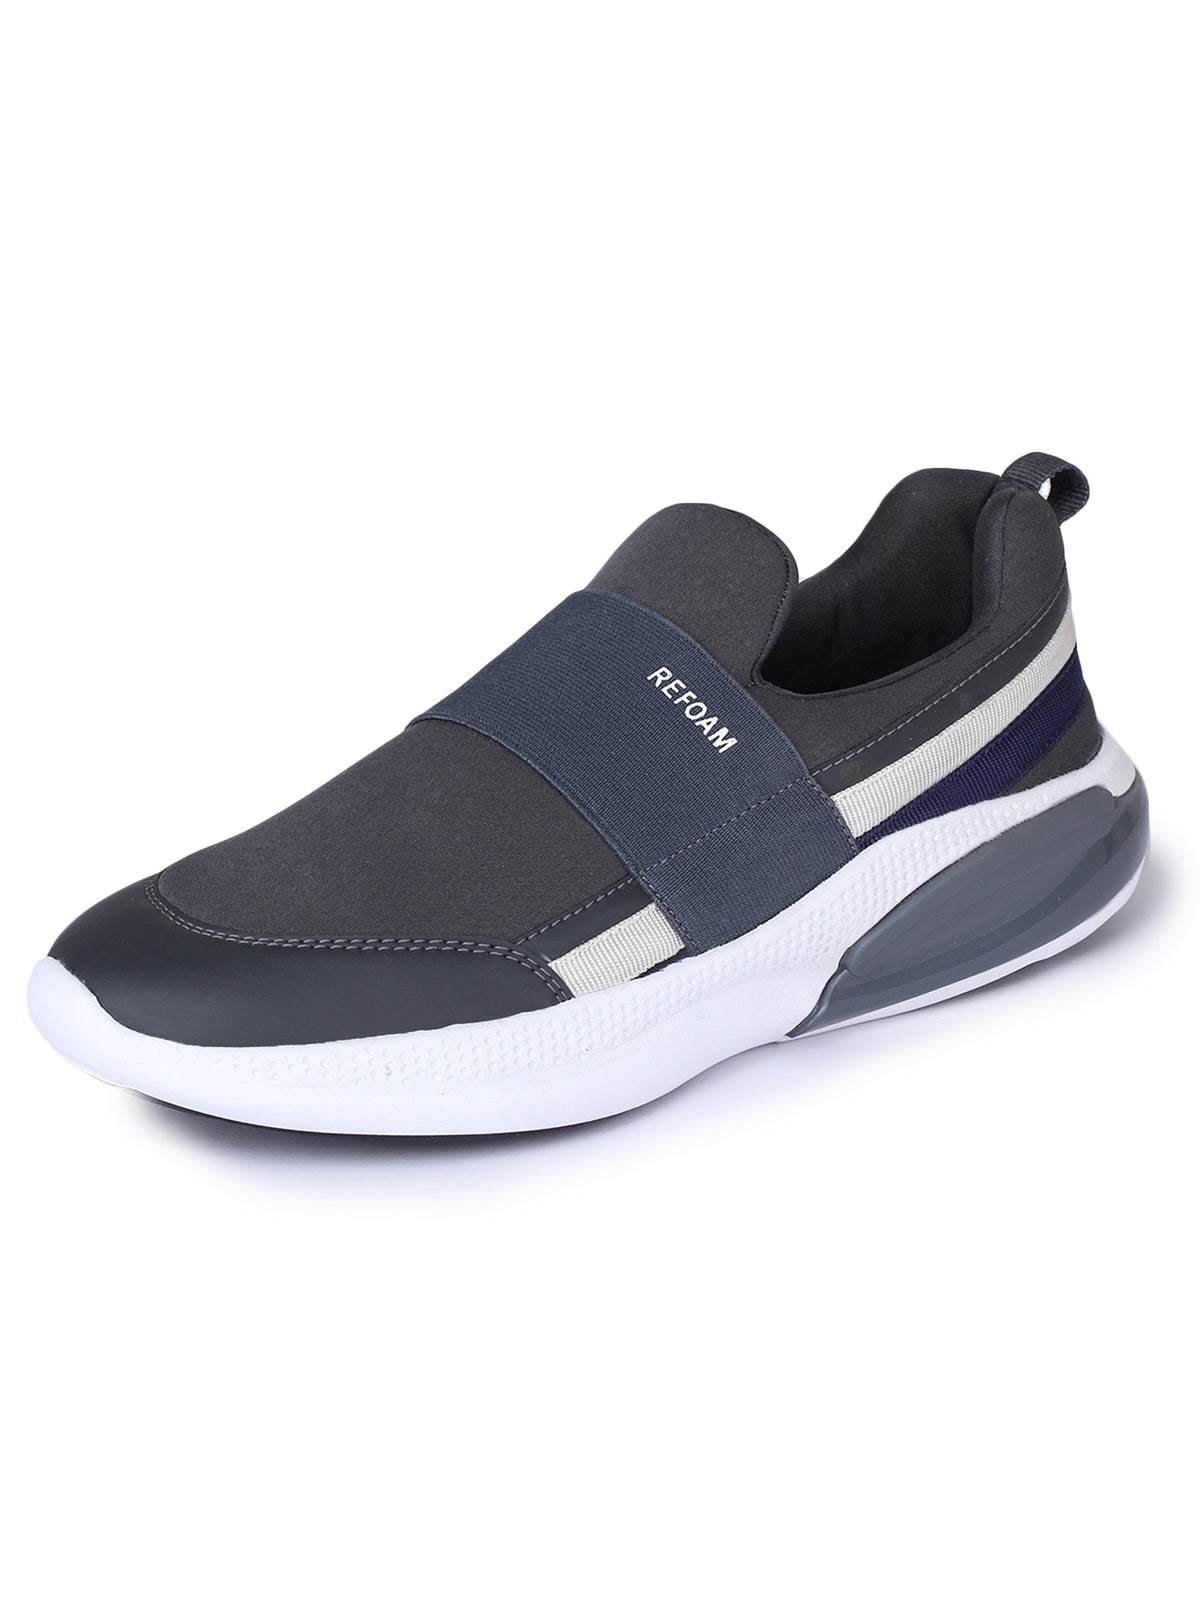 Grey Solid Mesh Slip On Lifestyle Casual Shoes For Men